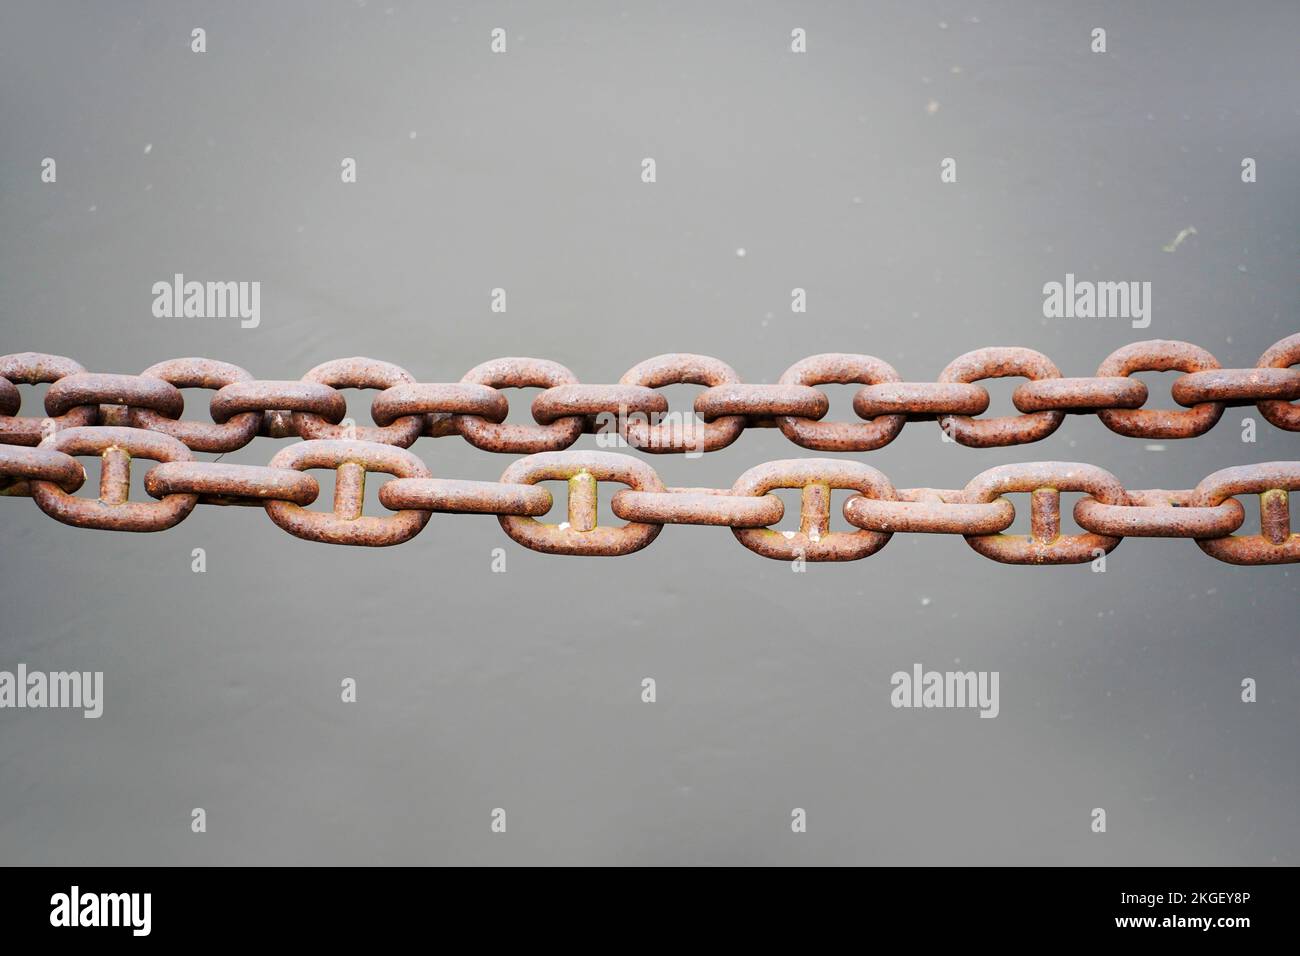 Rusty anchor chain against a gray background. Stock Photo